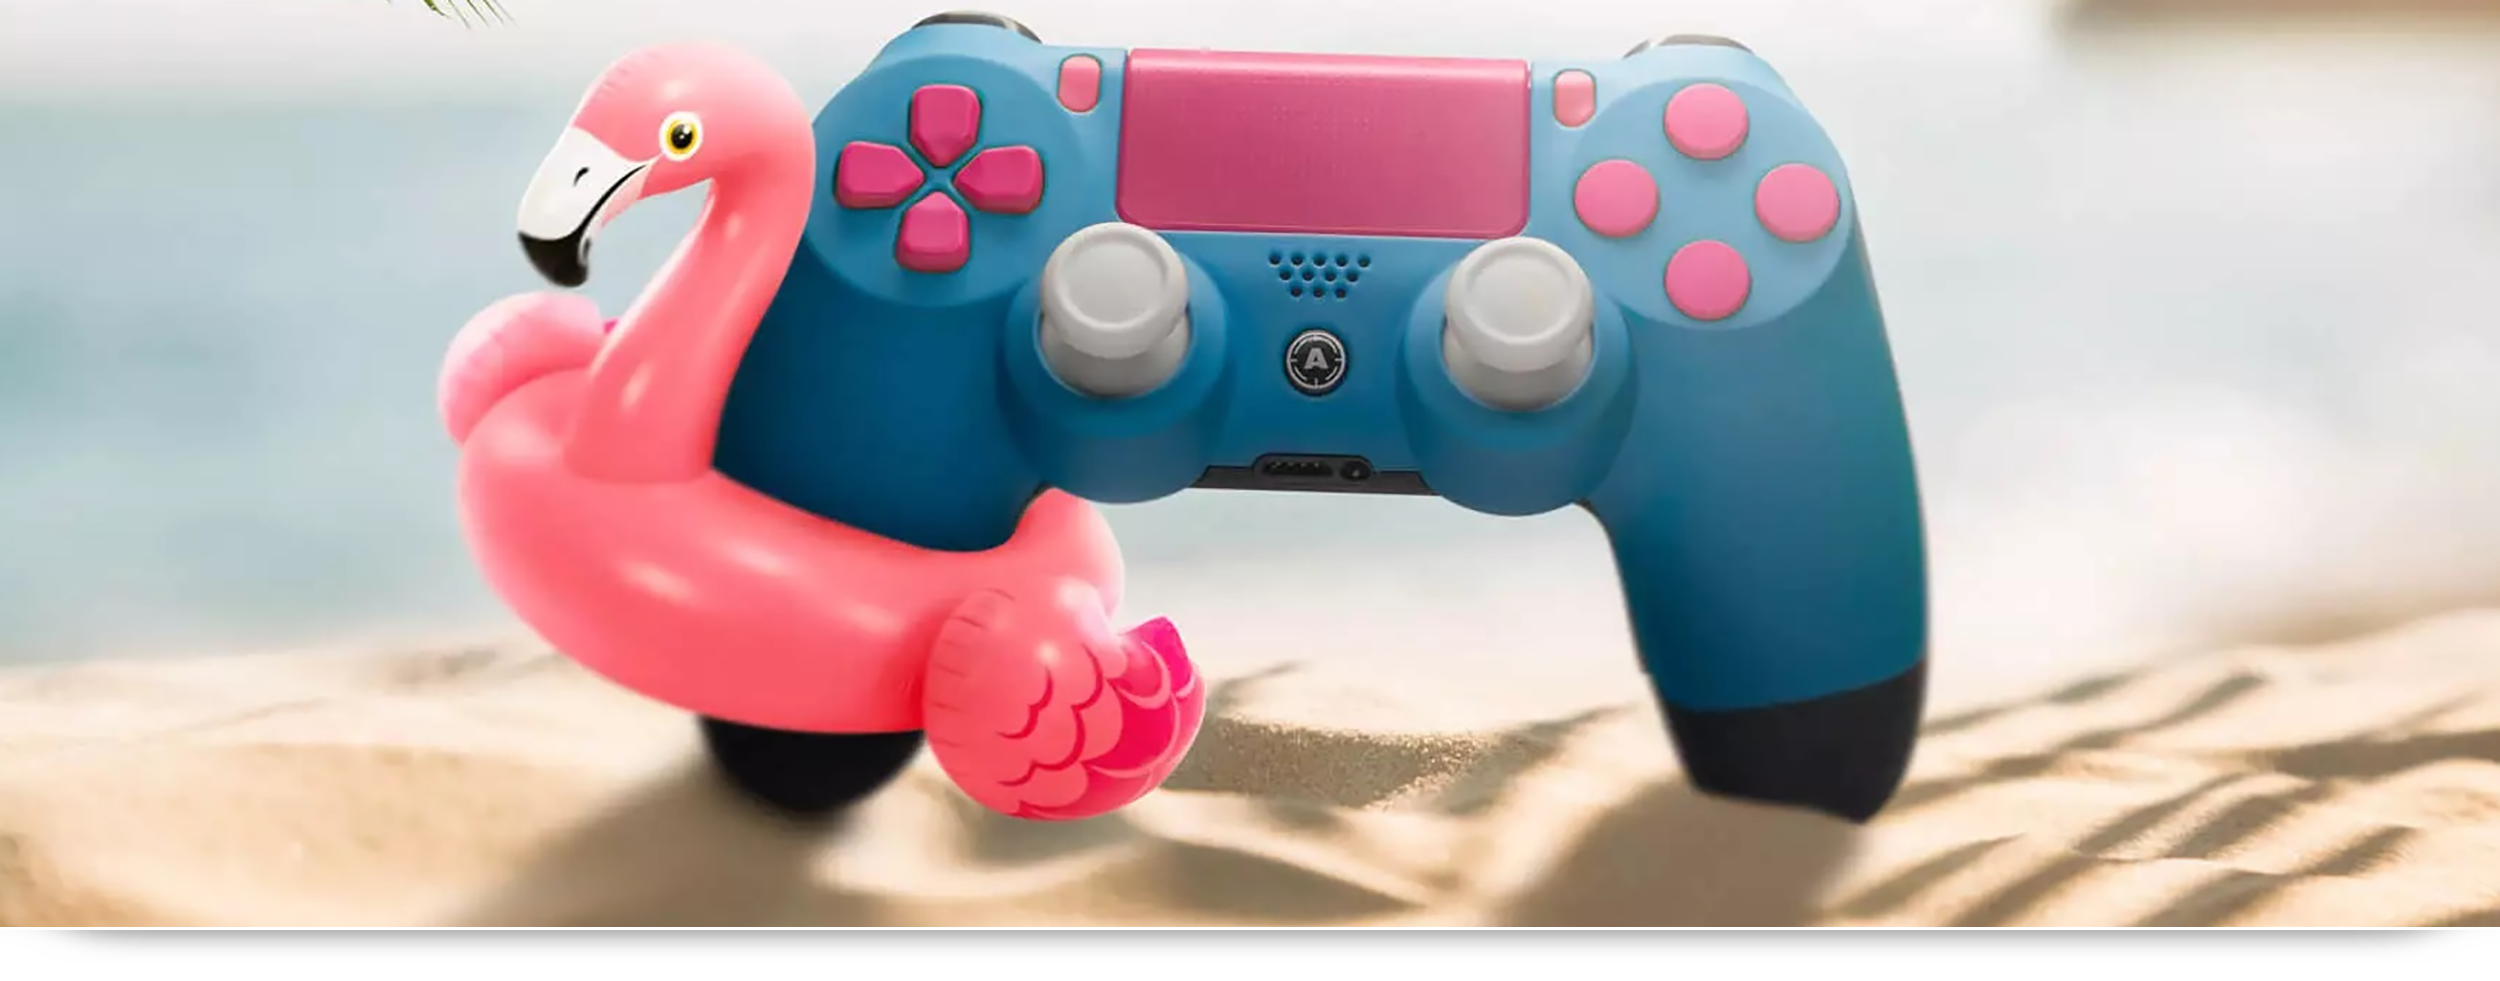 I've created some custom designs for last gen controllers